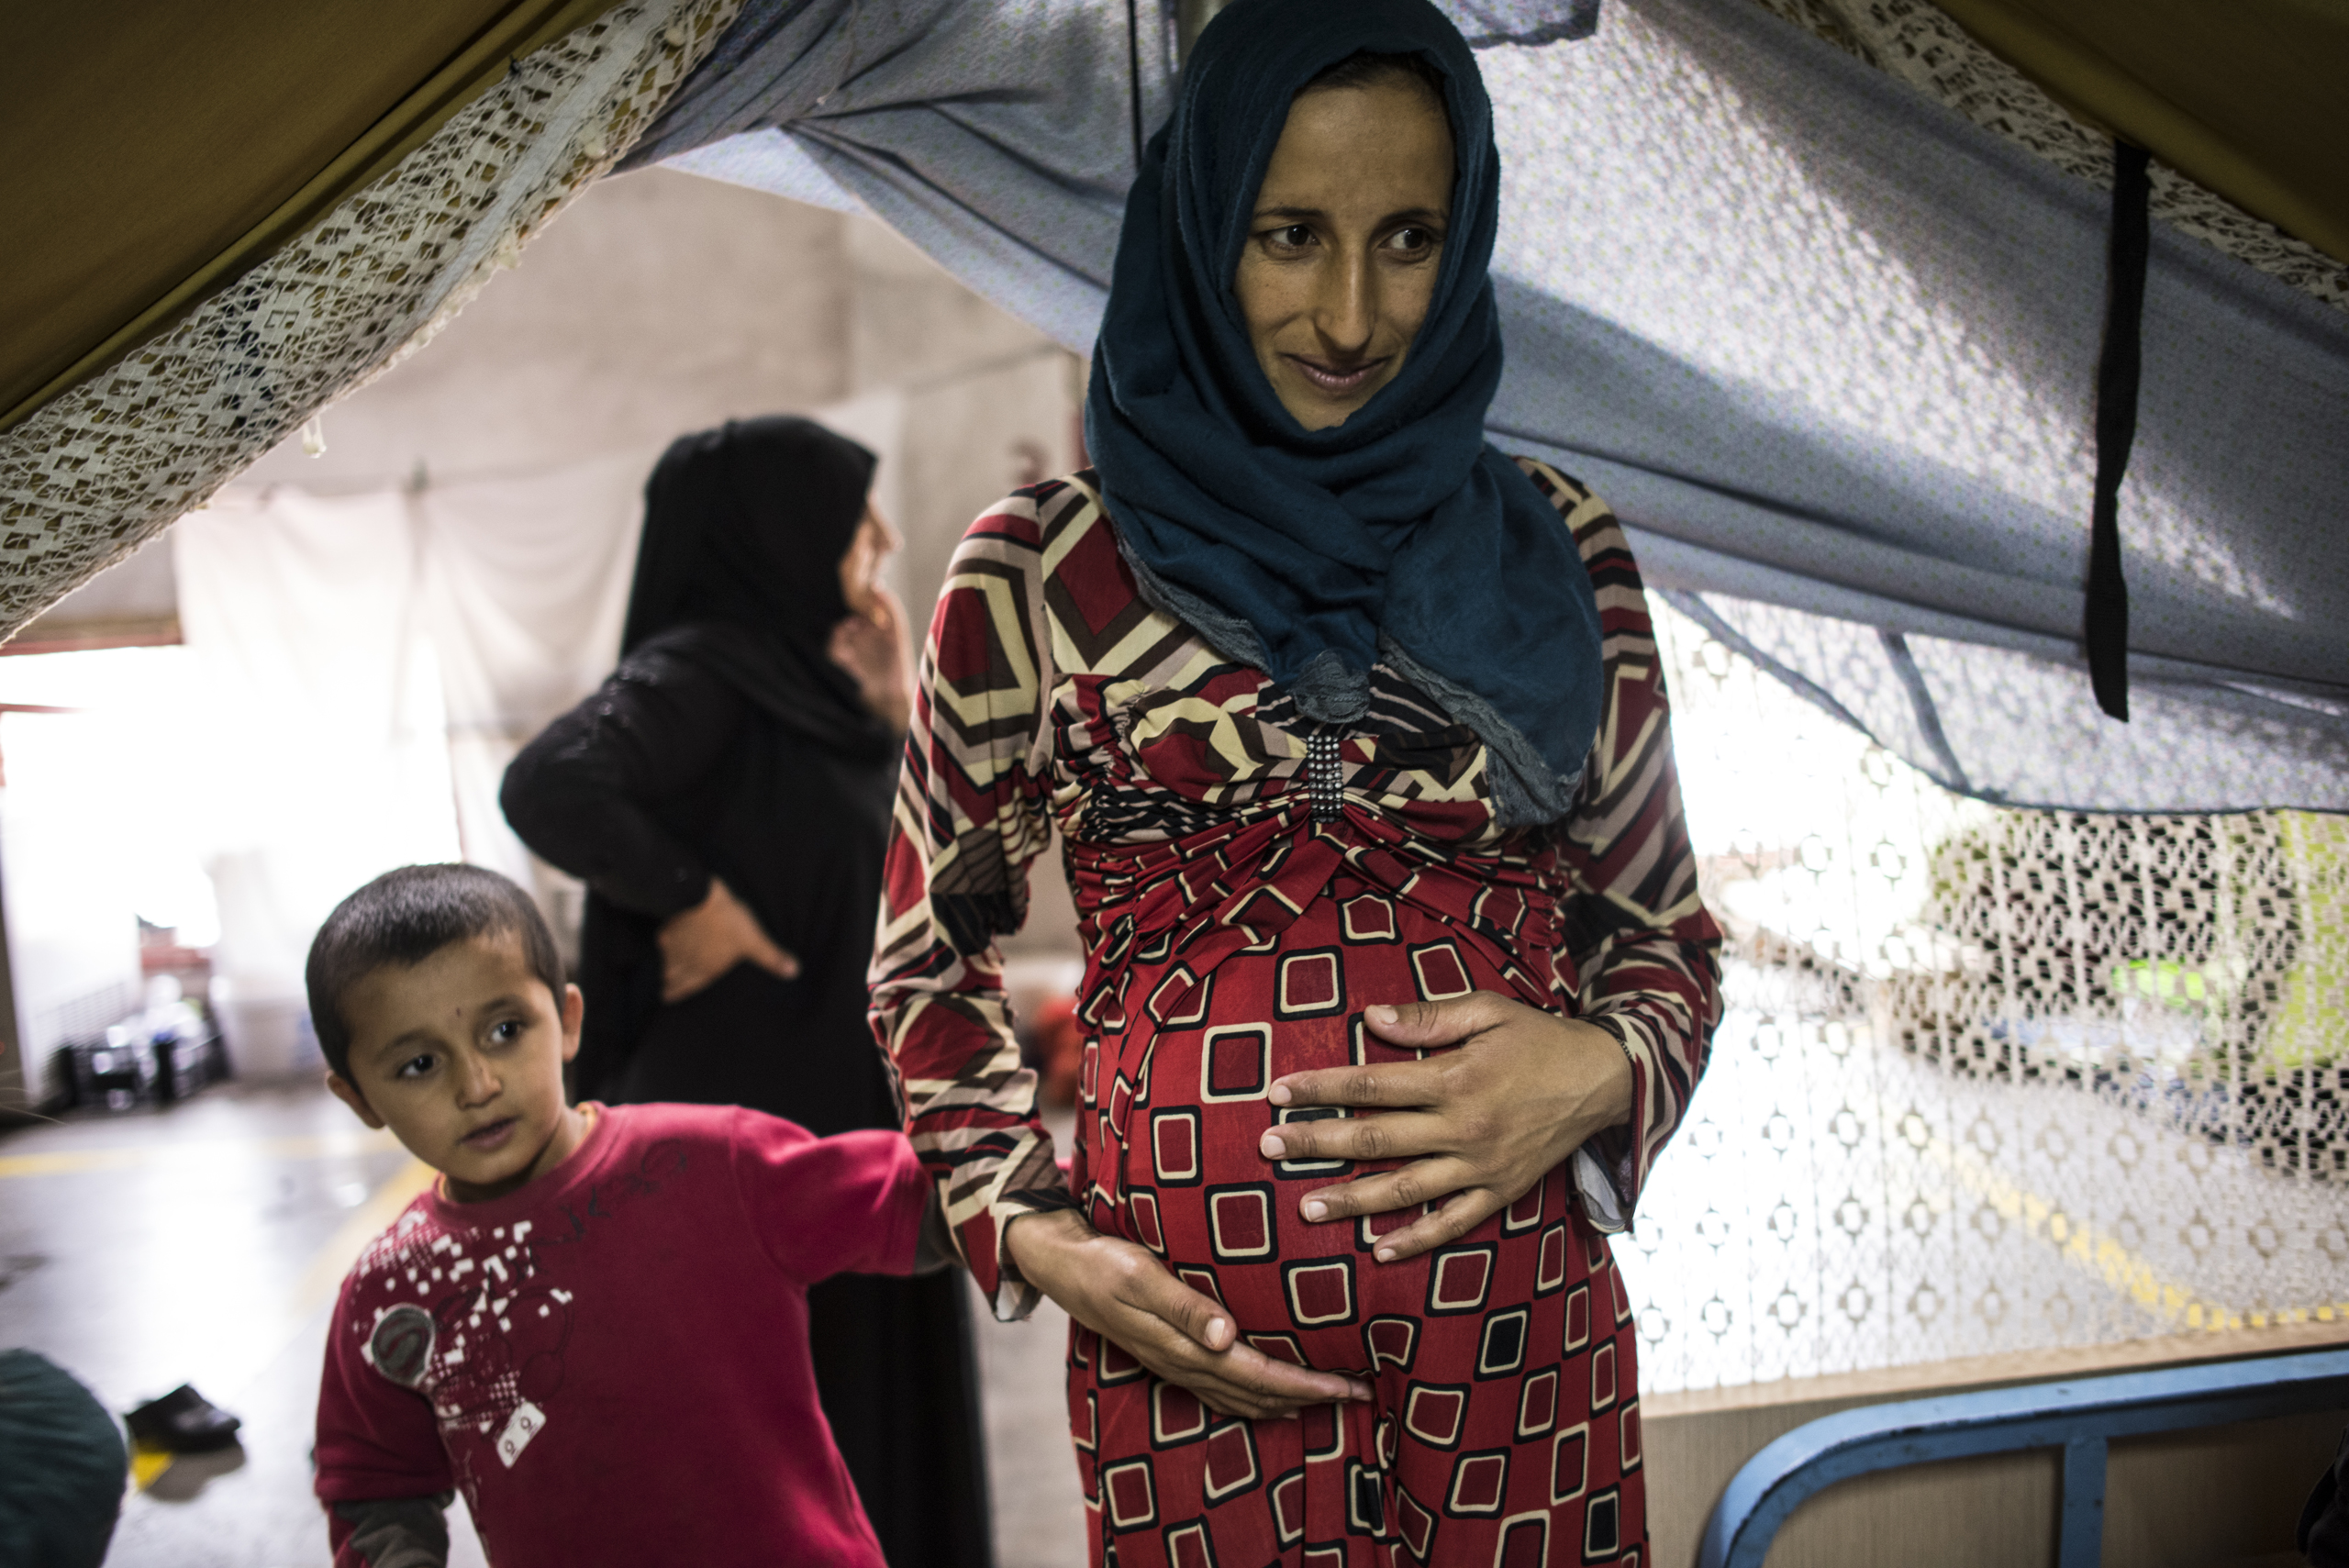 Illham Alarabi and her son in their  tent at the Oreokastro camp outside of Thessaloniki, Greece, September 9, 2016.  Over nine million Syrians have been displaced from their homes due to years of civil war in the country.